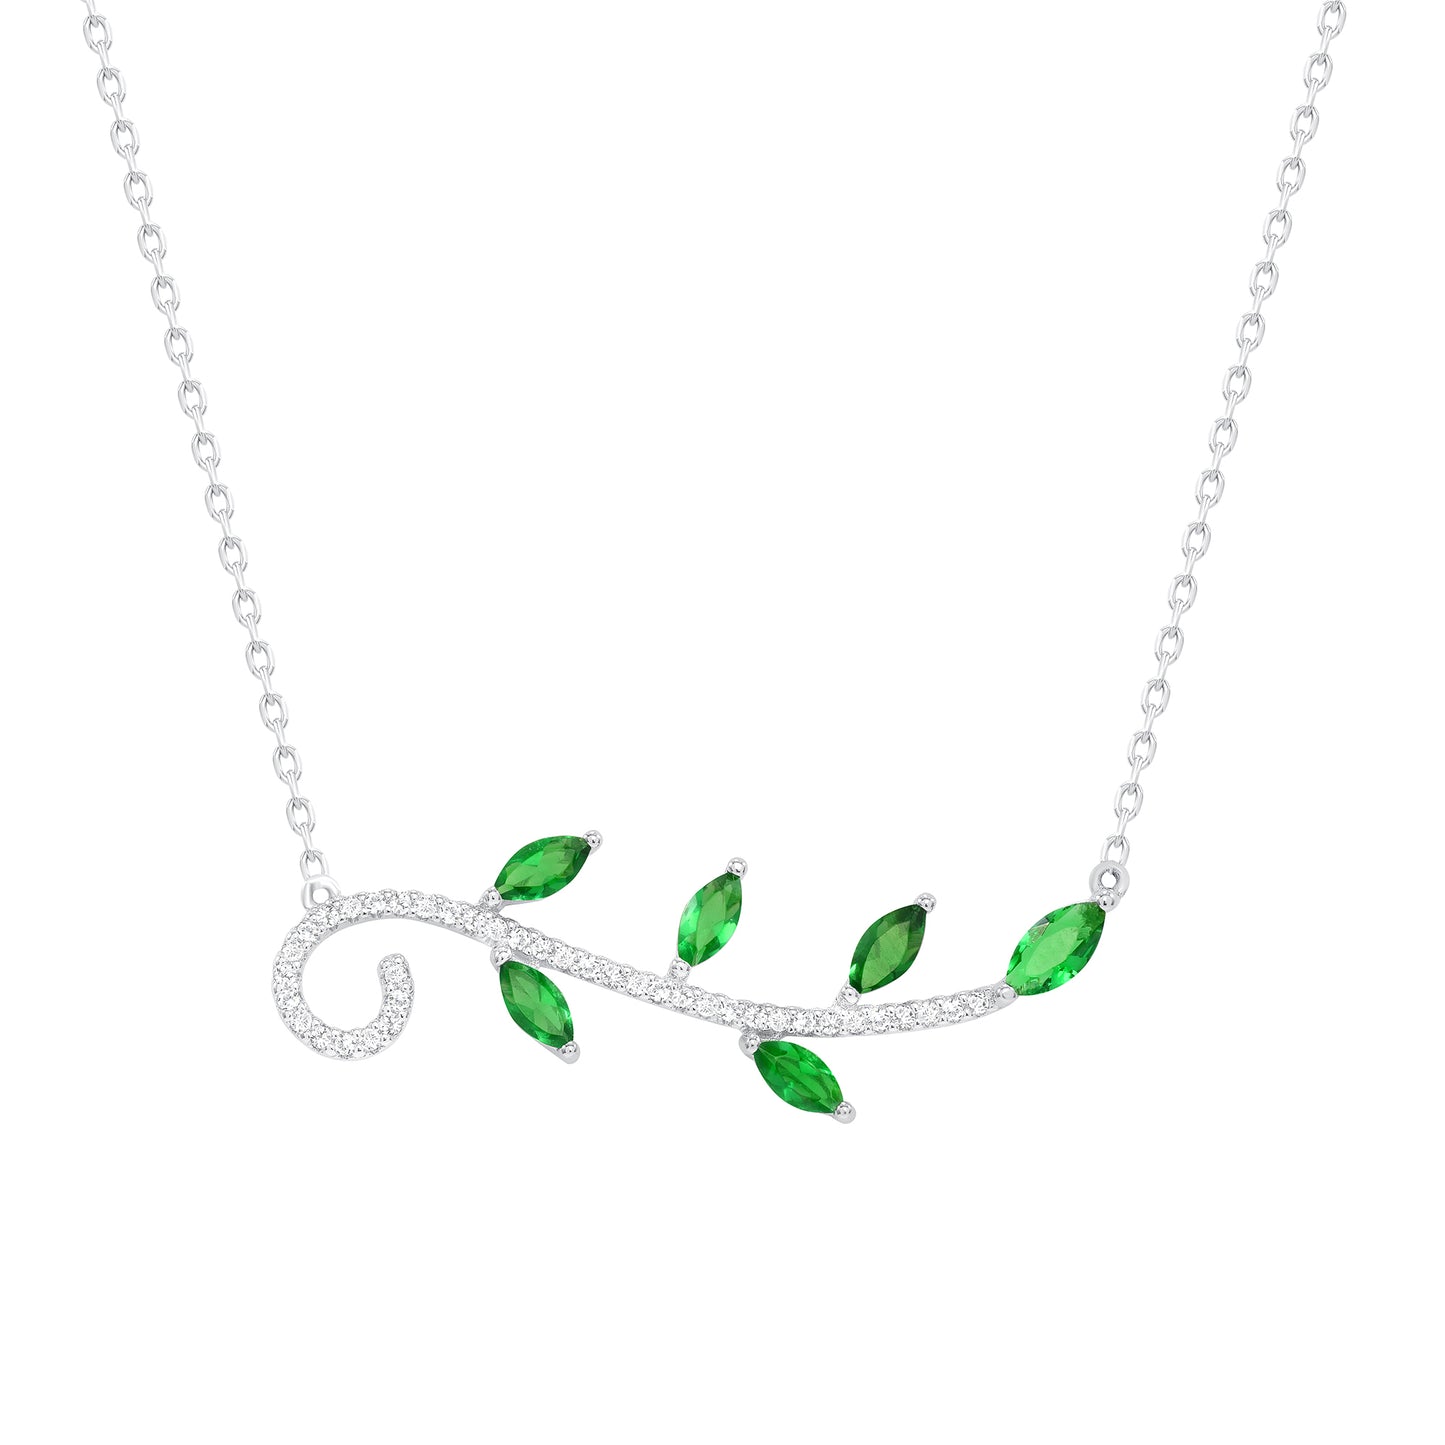 DGN1147GRN. Silver 925 Rhodium Plated Green Cubic Zirconia Branch w/ Leaves Cubic Zirconia Necklace